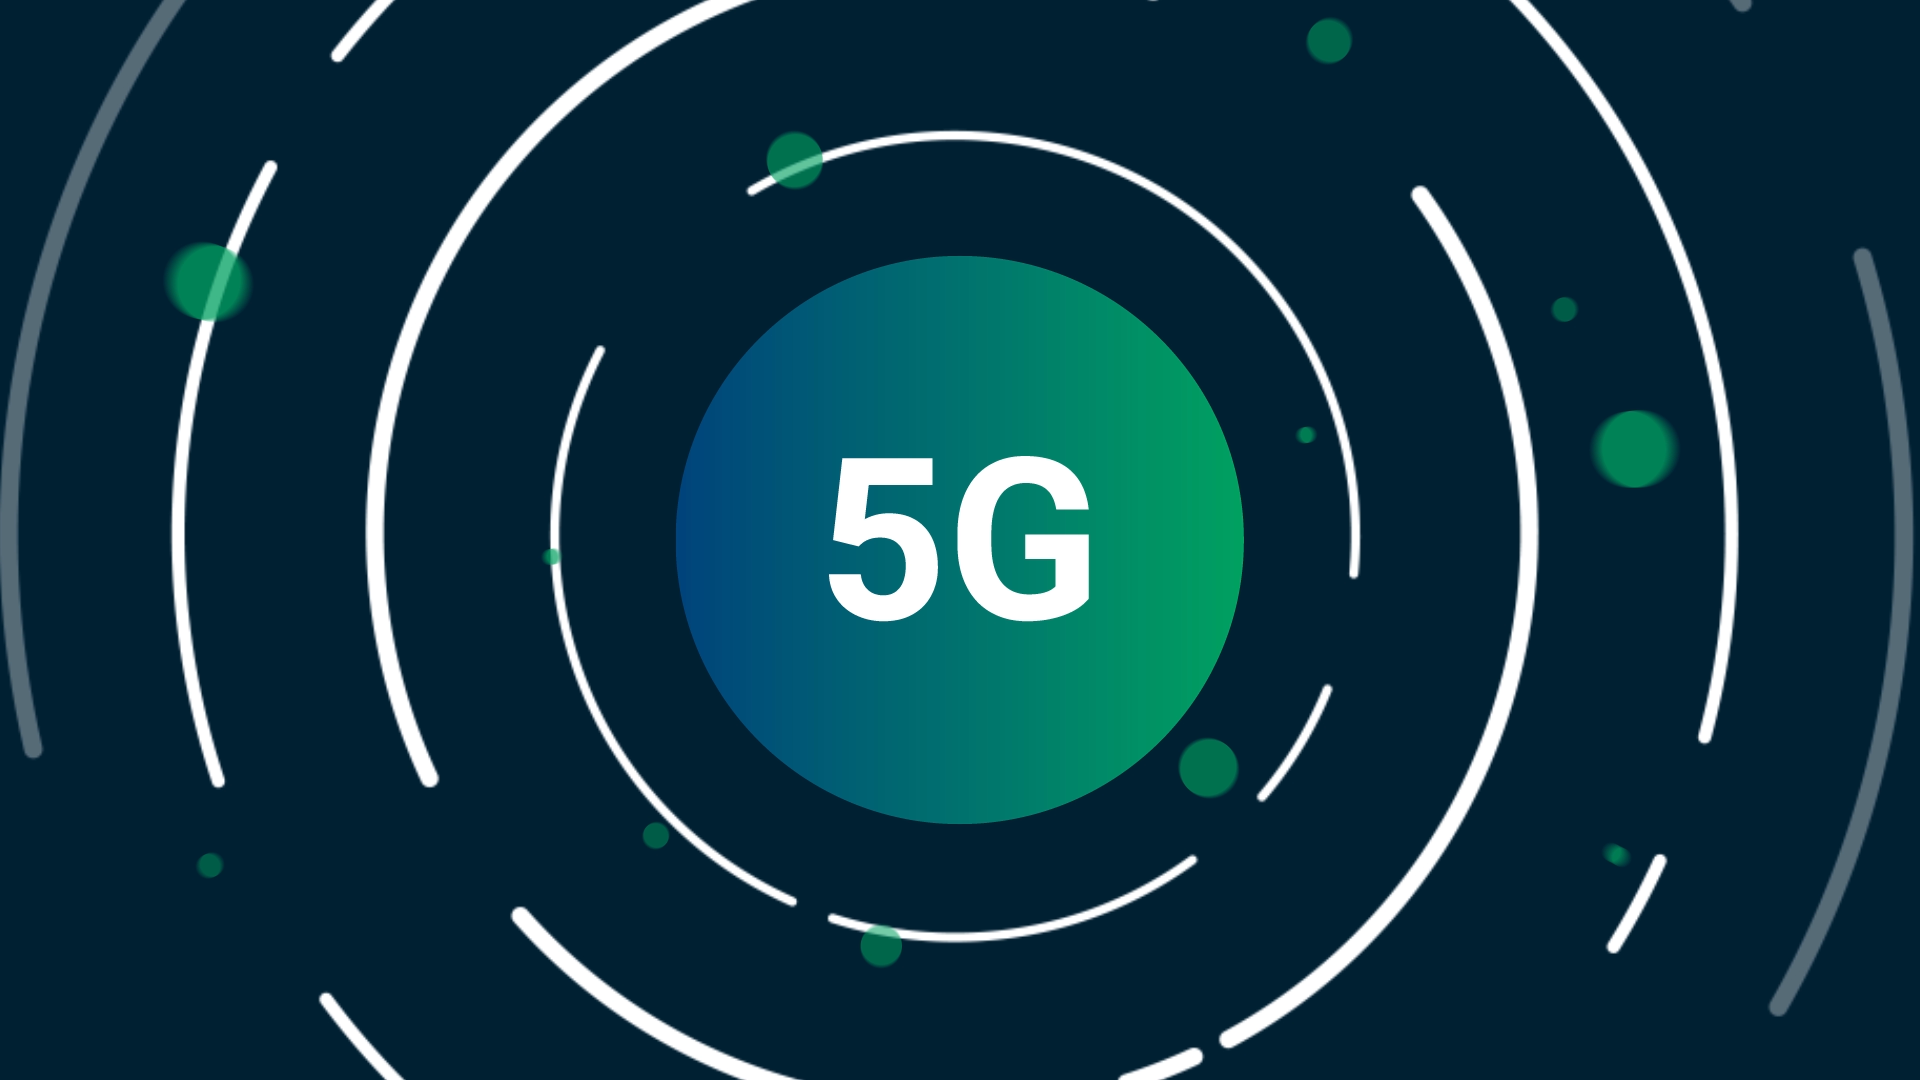 Animated 5G logo from the explainer video